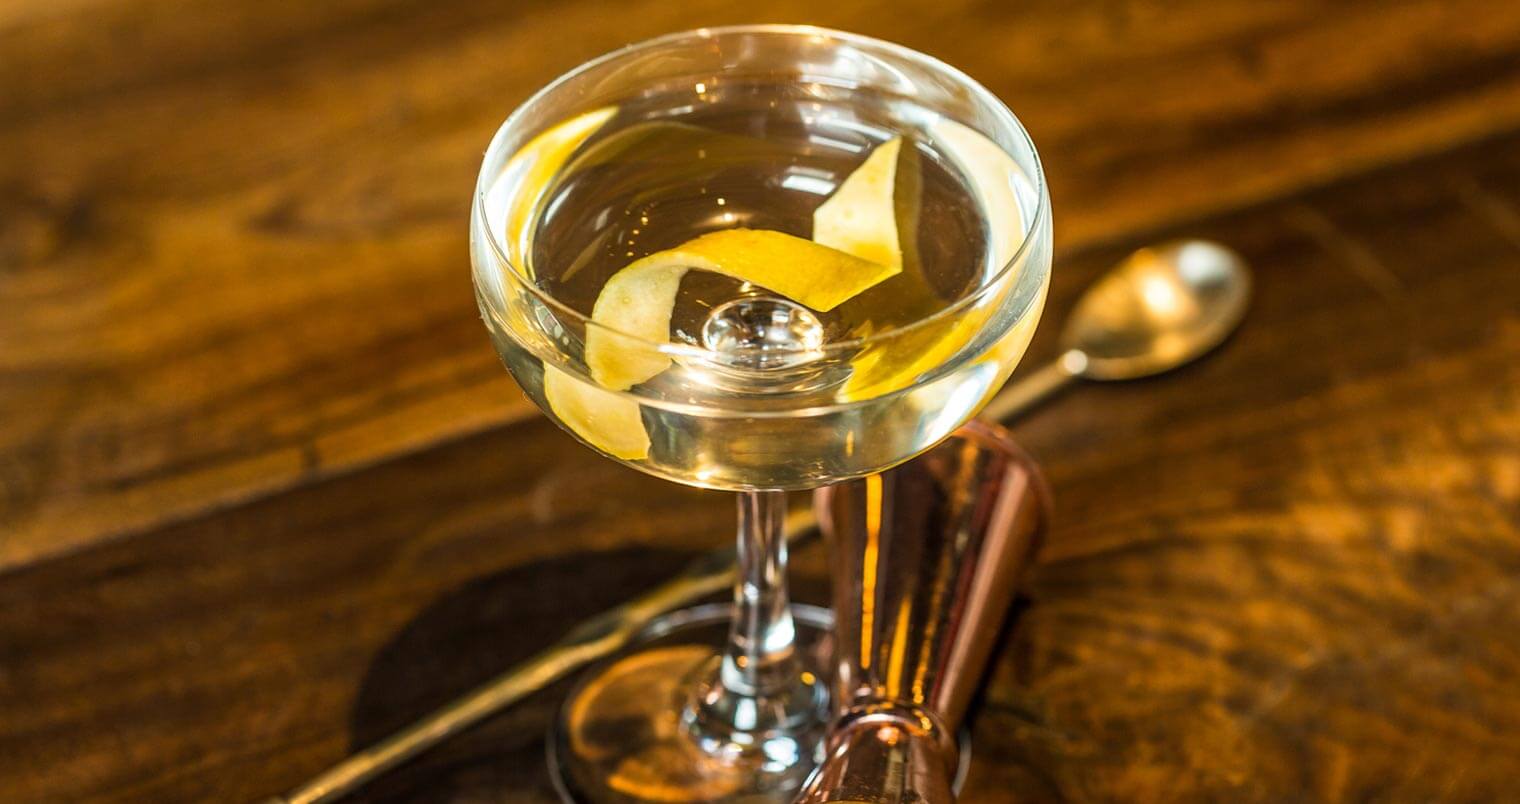 The Classic Martini, cocktail with garnish, featured image